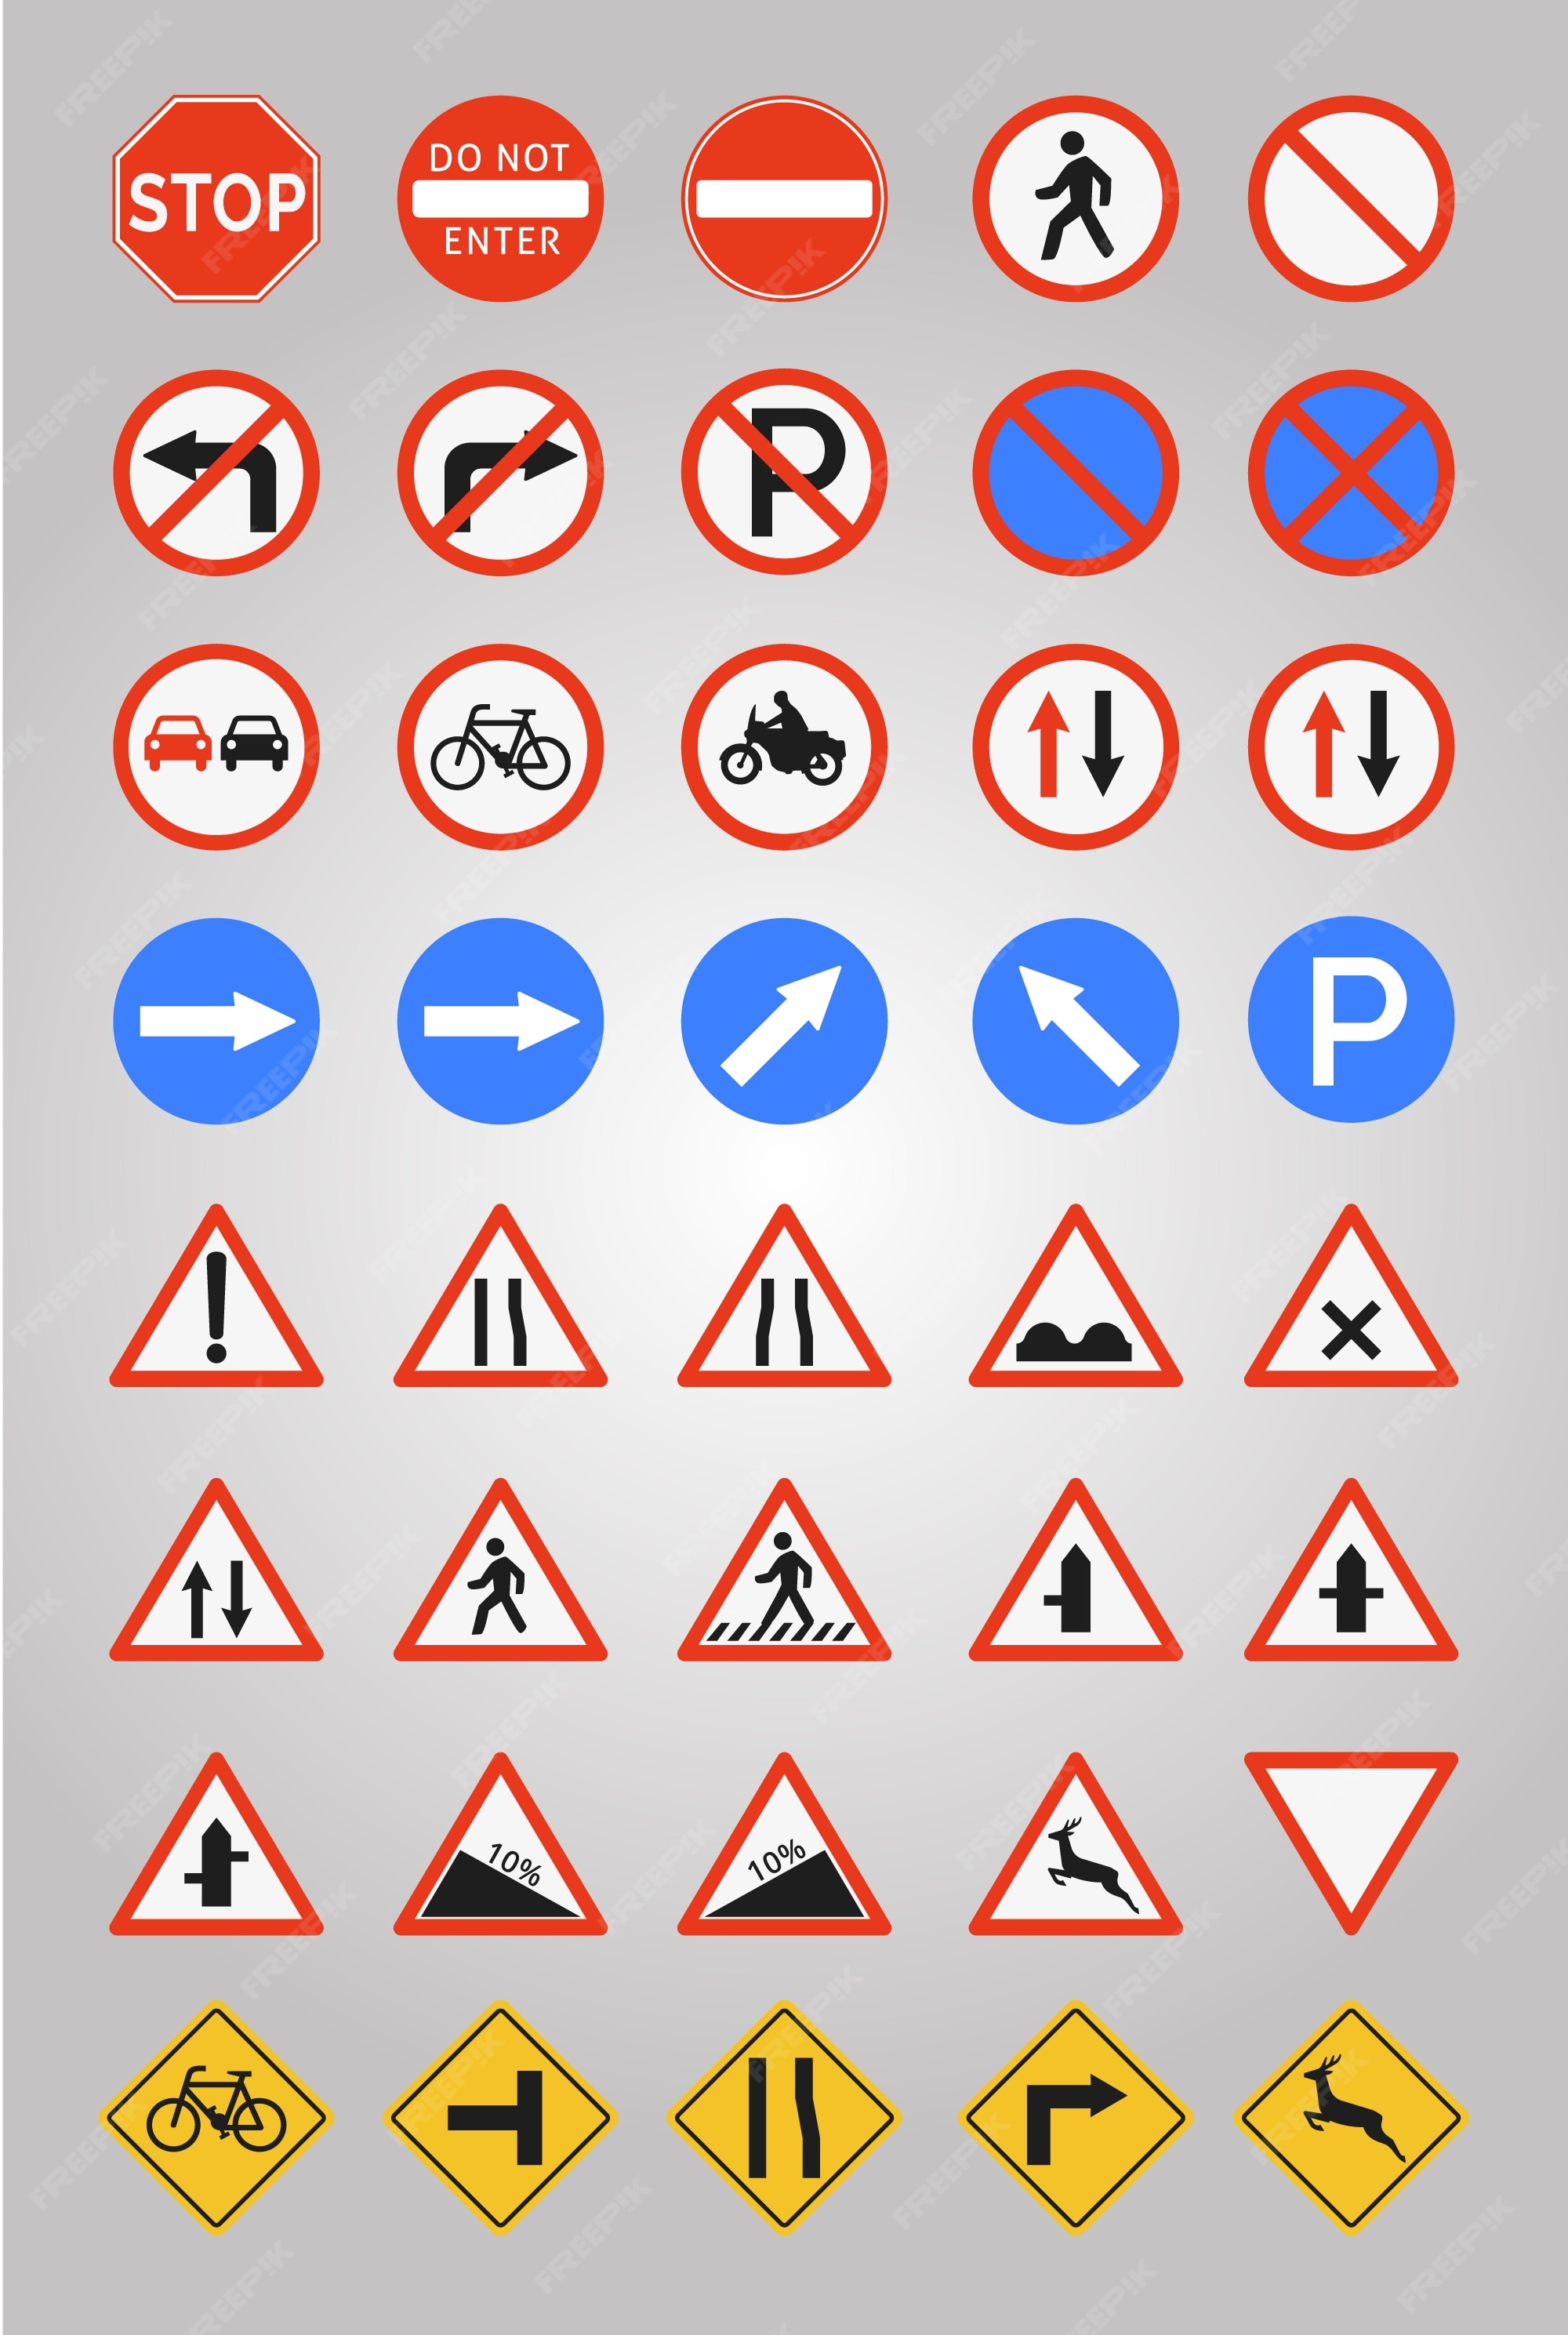 street signs and their meanings